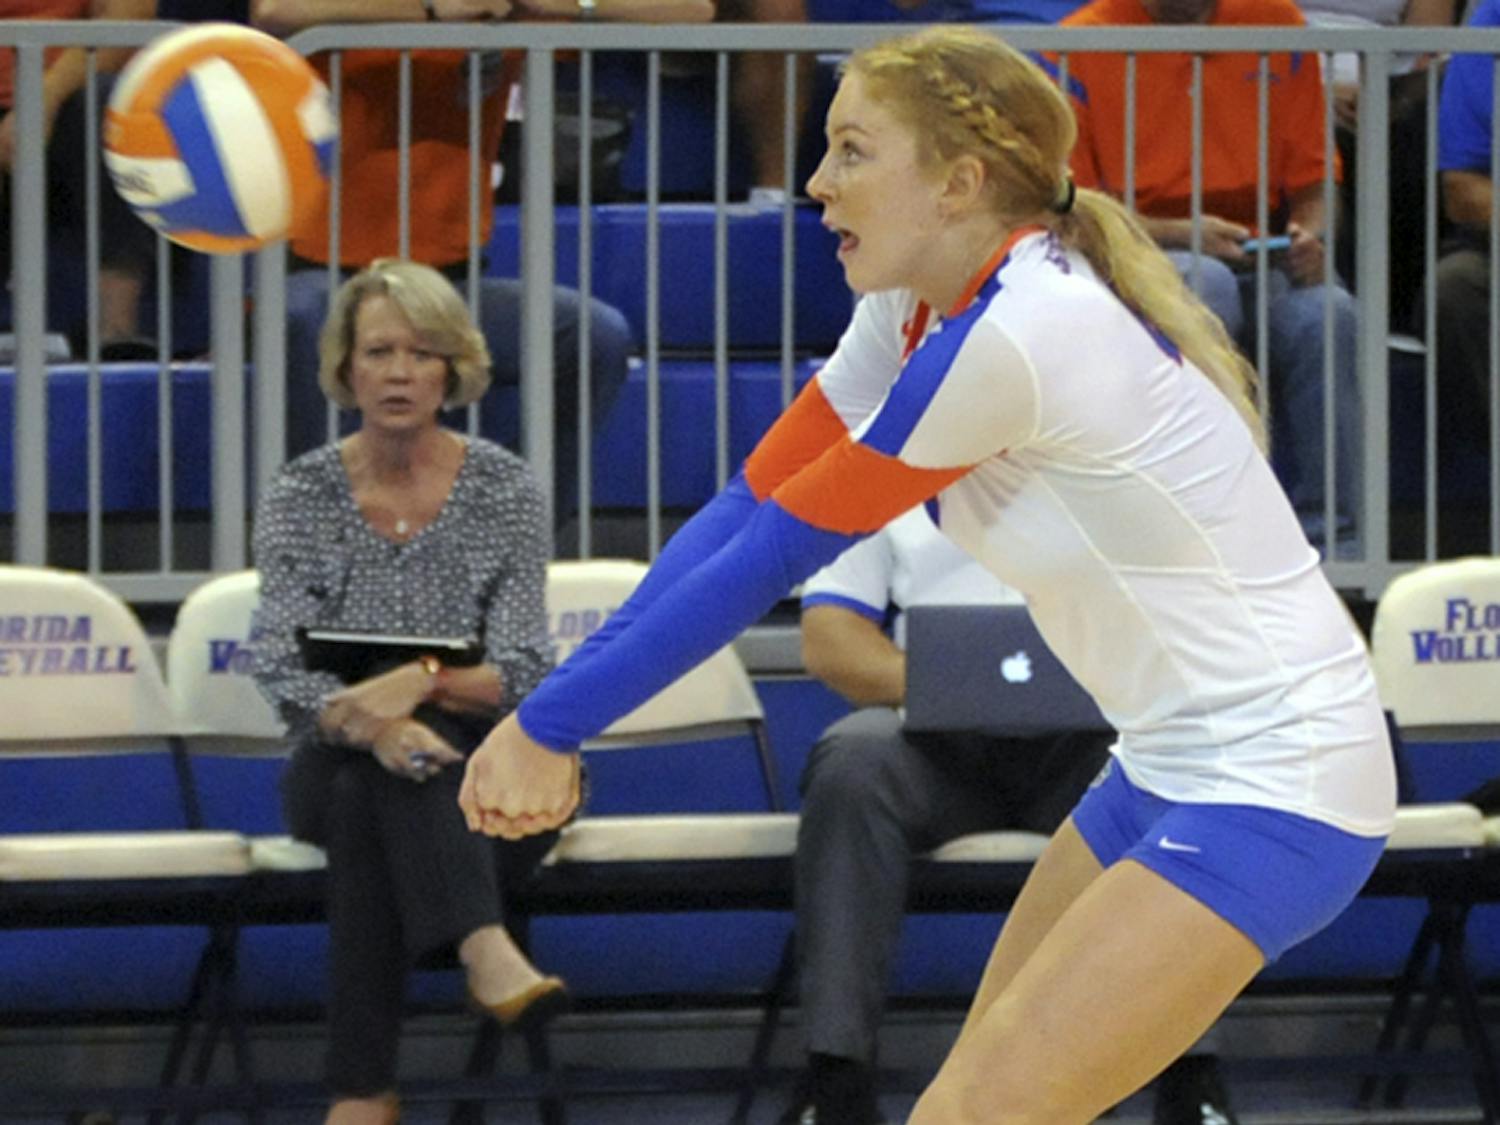 UF outside hitter Carli Snyder passes a ball during Florida's 3-0 win against Texas A&amp;M on Oct. 9, 2015, in the O'Connell Center.